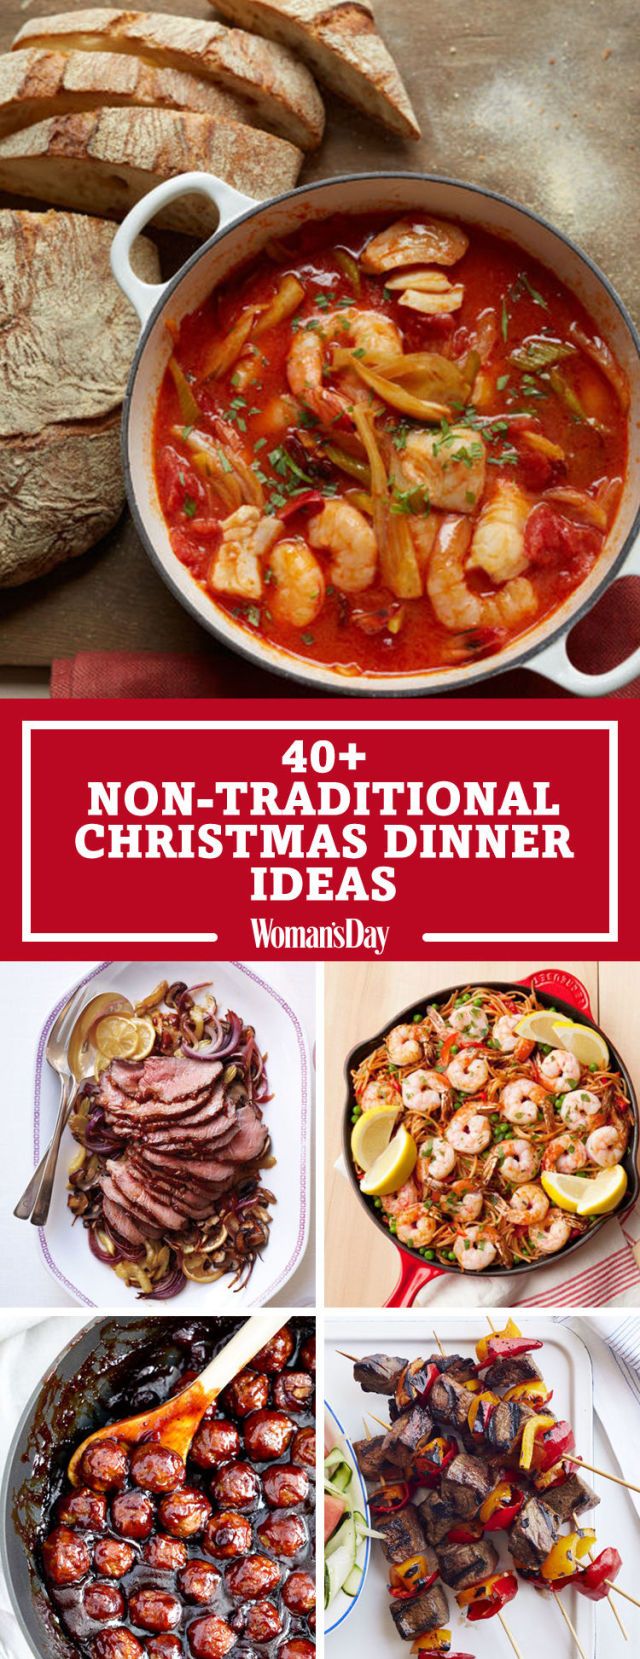 Traditional Southern Christmas Dinner Recipes / Soul Food Christmas Dinner Recipe : Come Together A Soul ... / Southern christmas dinner recipes and menu ideas julias